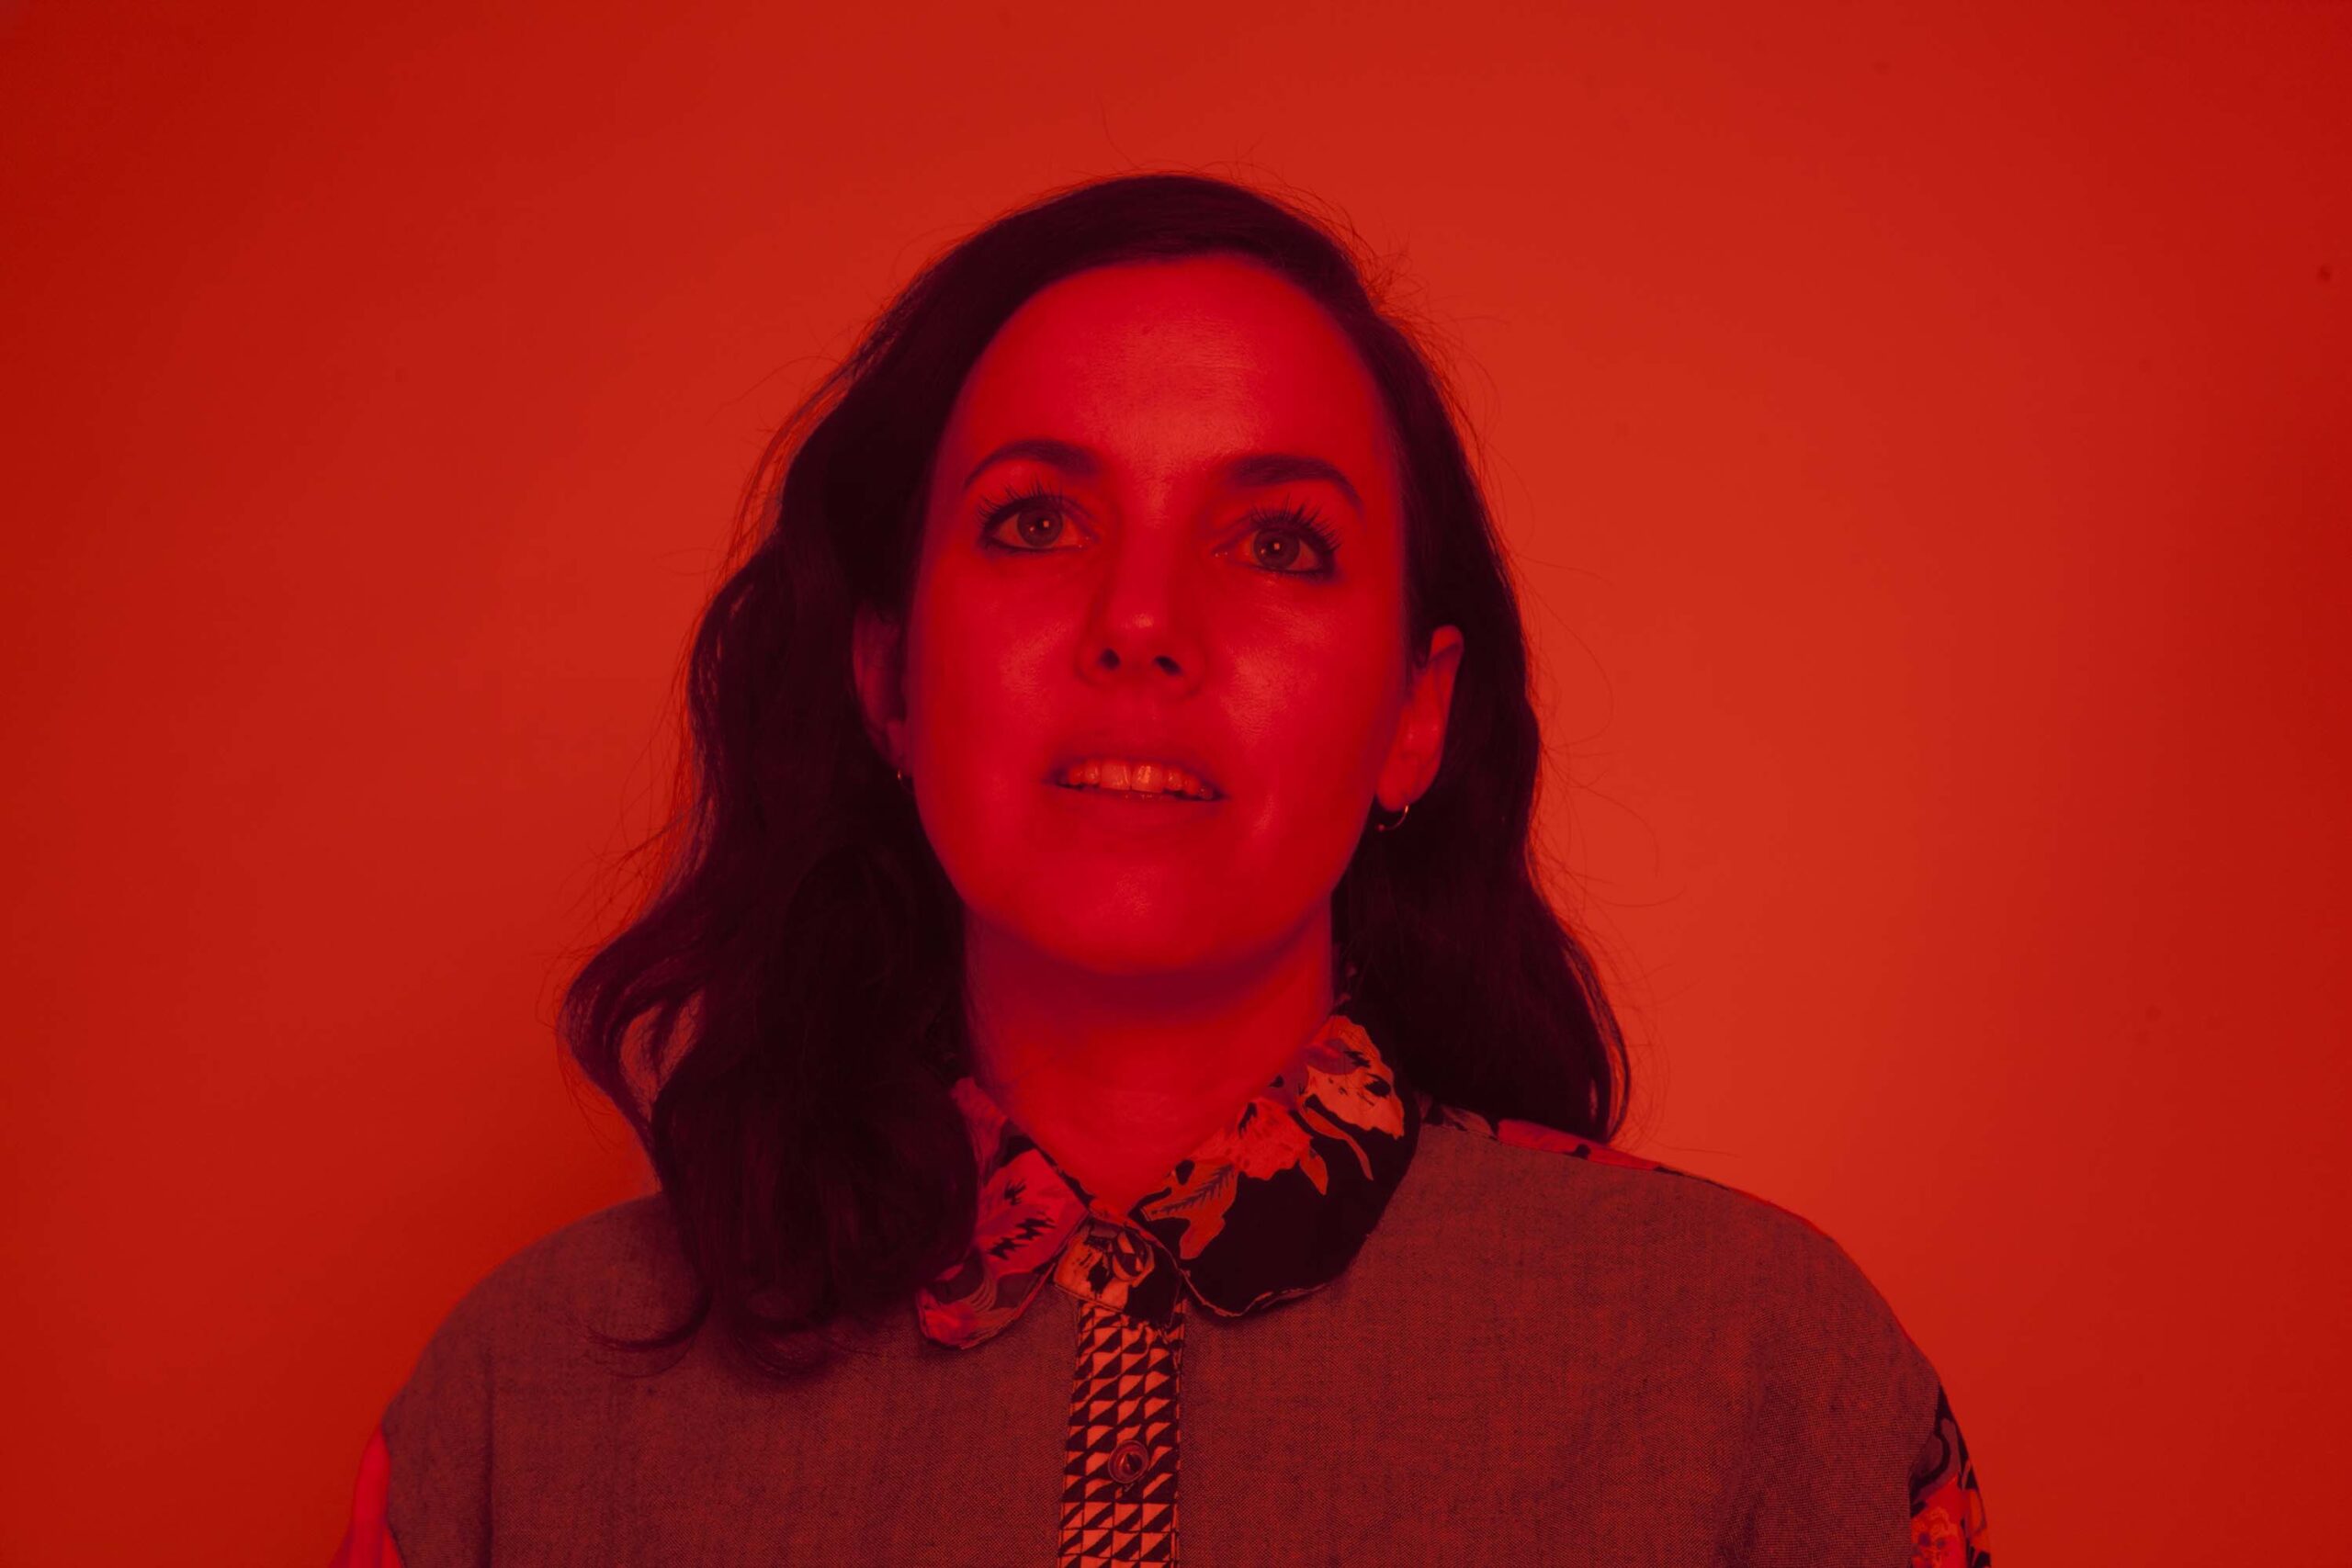 GIG OF THE WEEK // ANNA MEREDITH @ THE OLD MARKET, BRIGHTON. TONIGHT